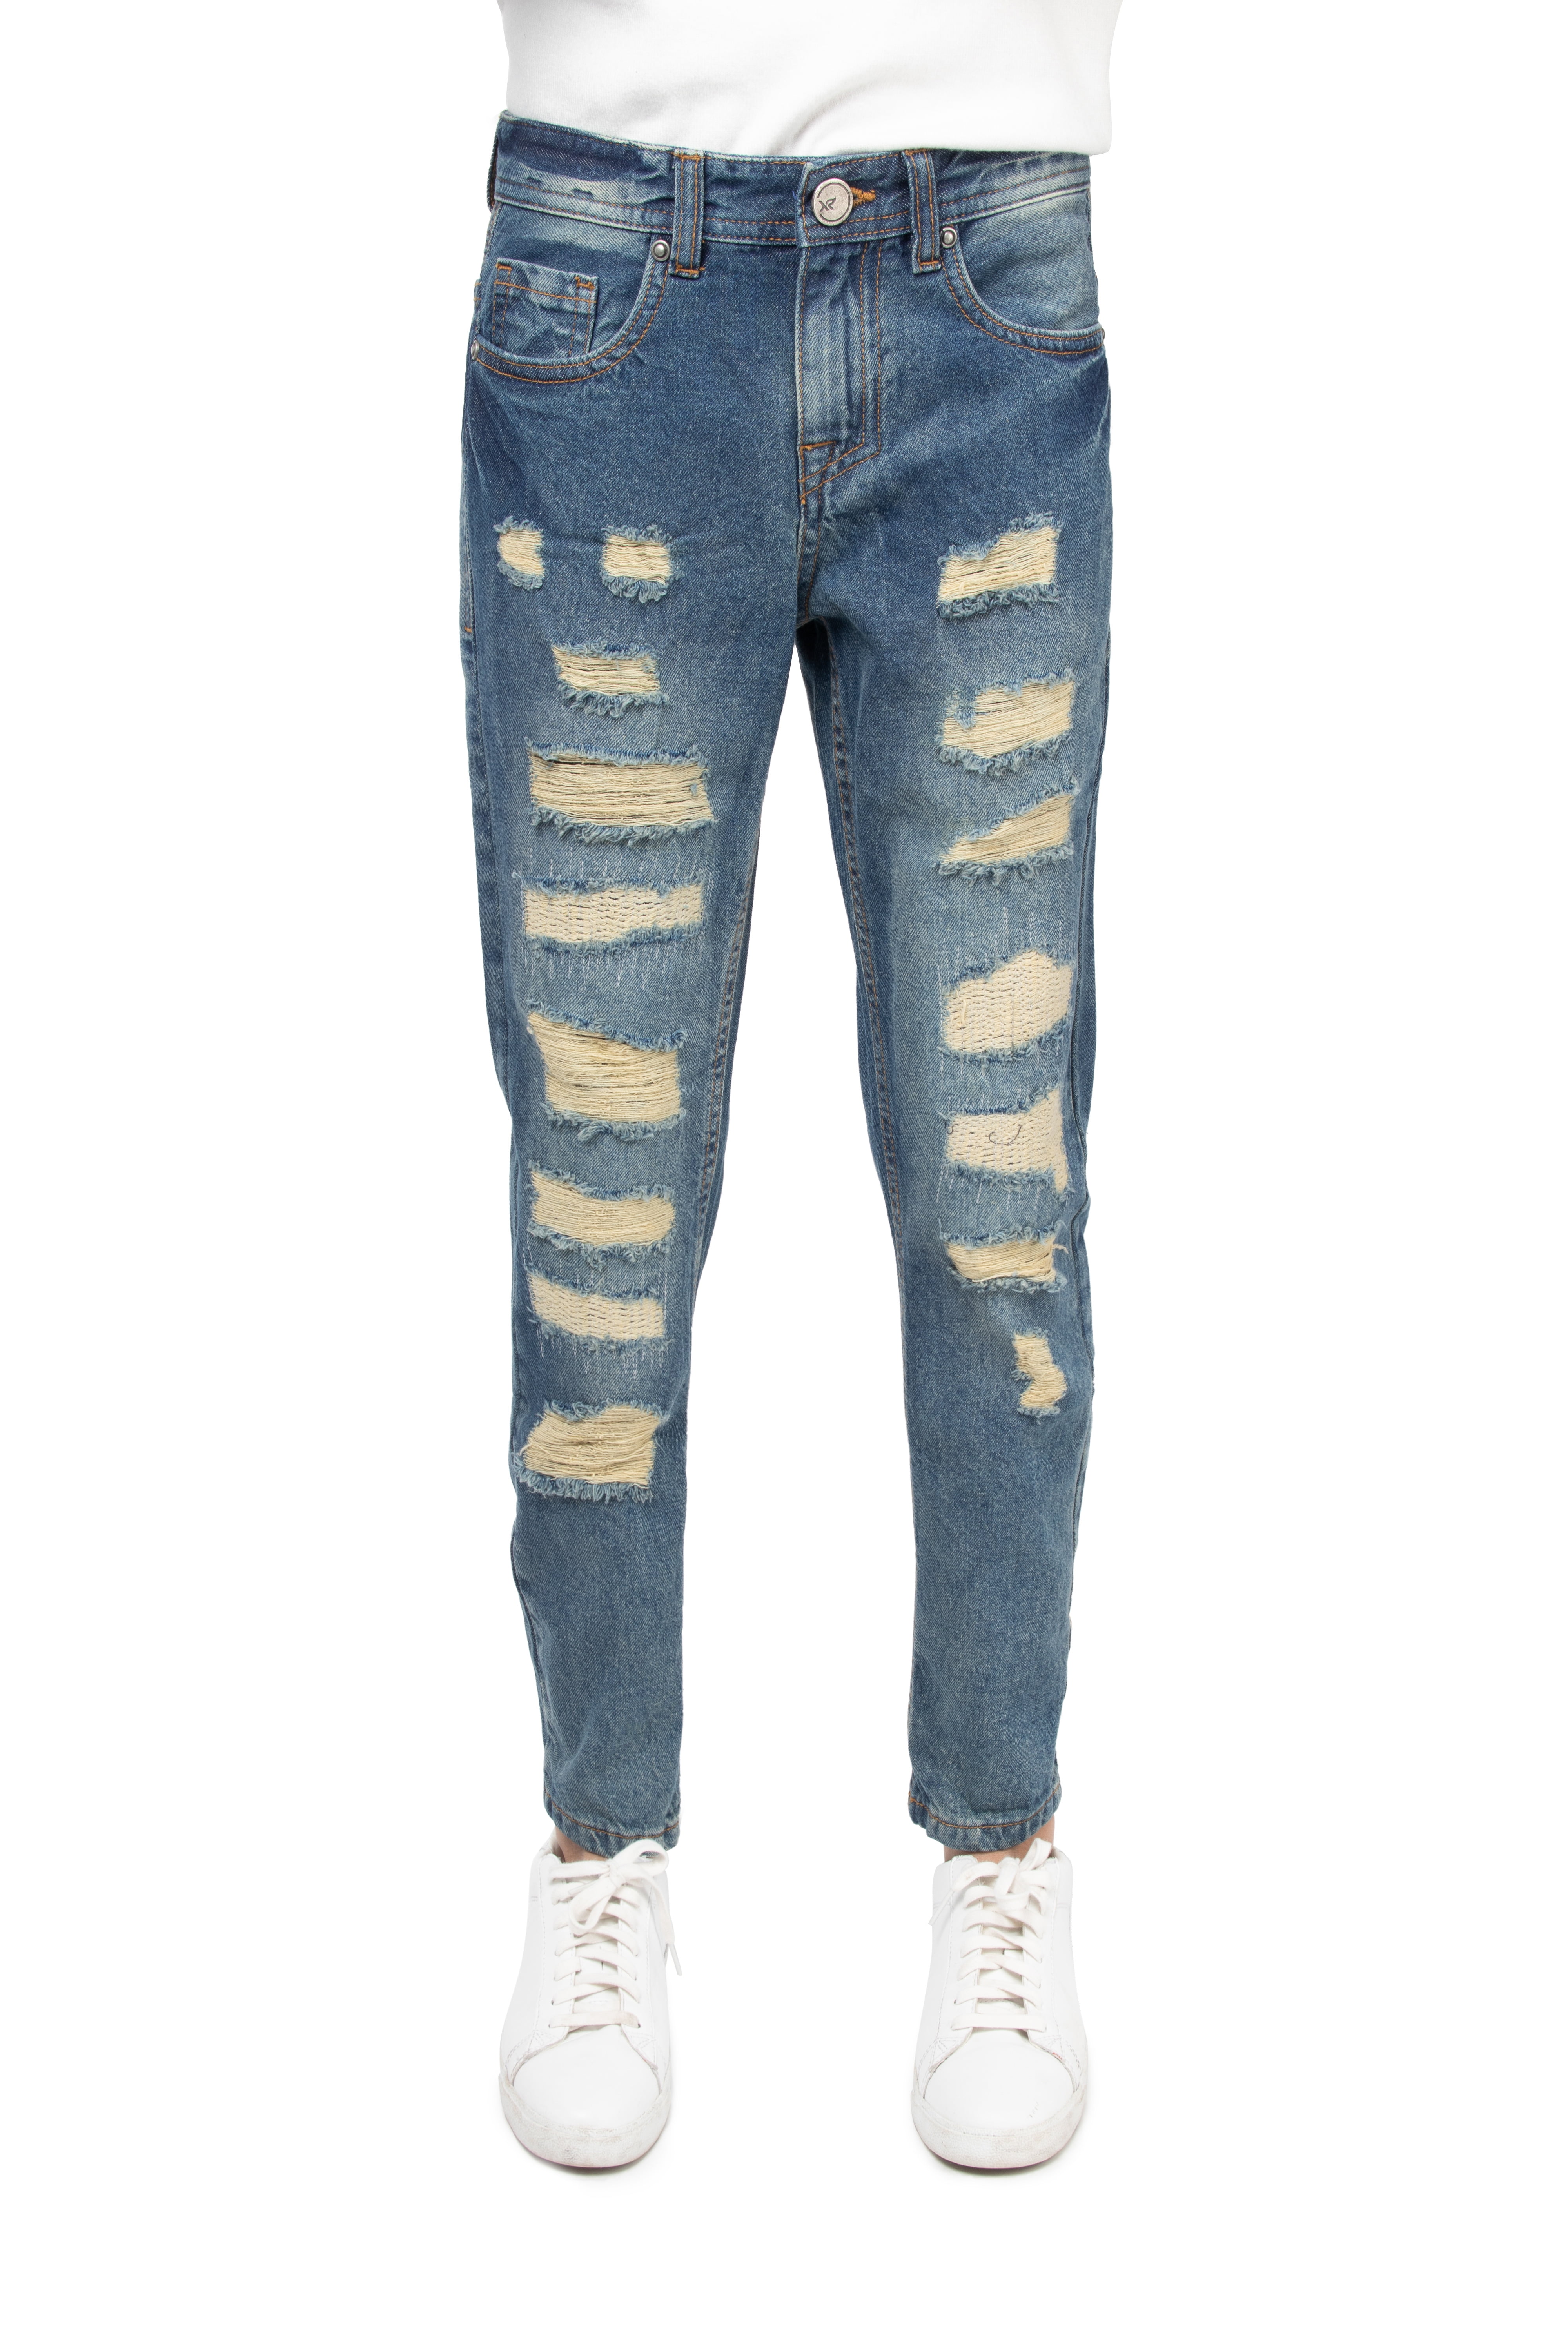 X RAY Skinny Ripped Jeans for Boys – Distressed Slim Fit Denim